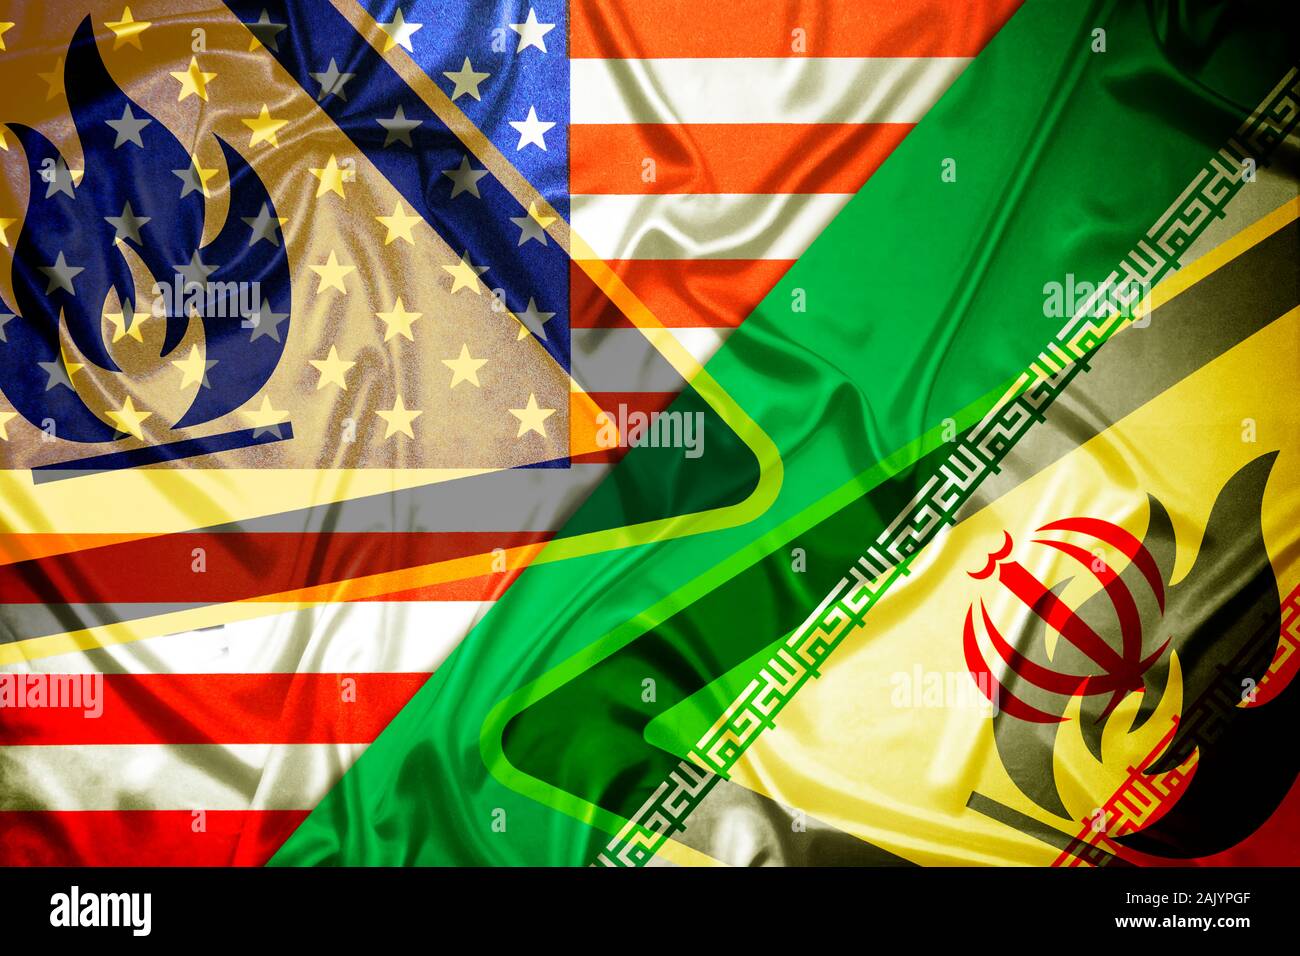 Flags of Iran and the USA and warning signs, US-Iran conflict Stock Photo